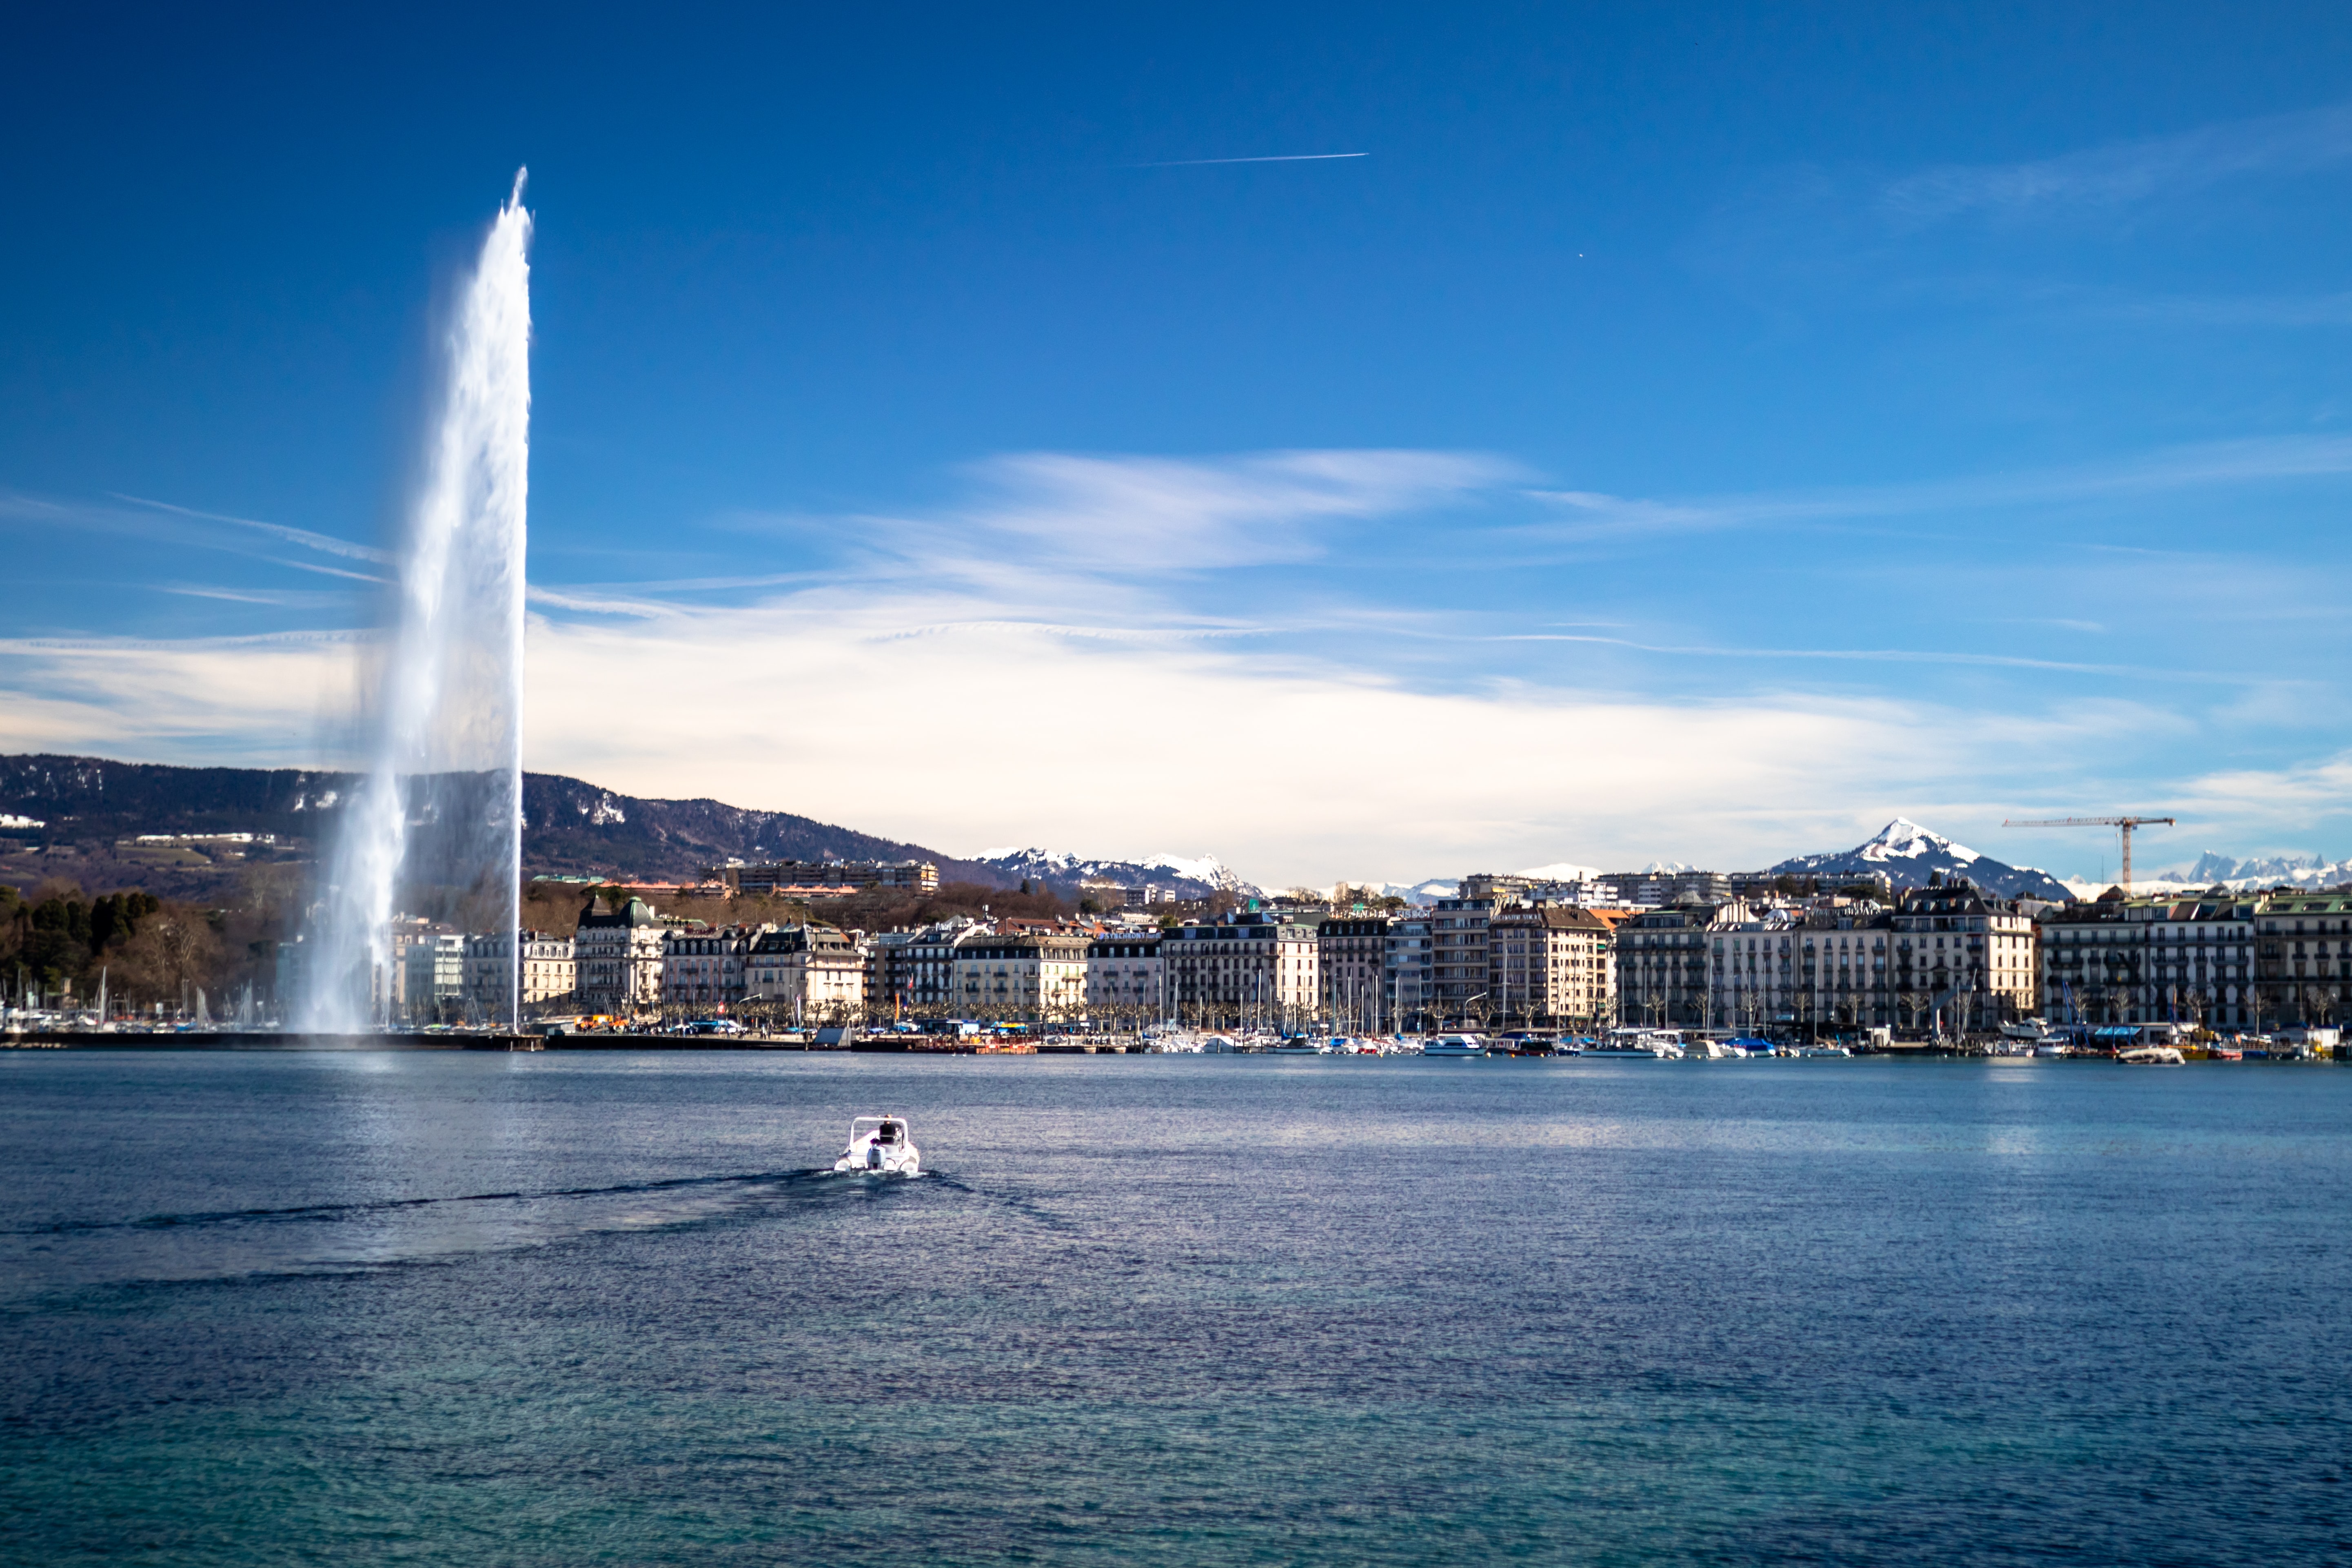 The beautiful city and the lake of Geneva with a boat, fountain, city and mountains in the distance

